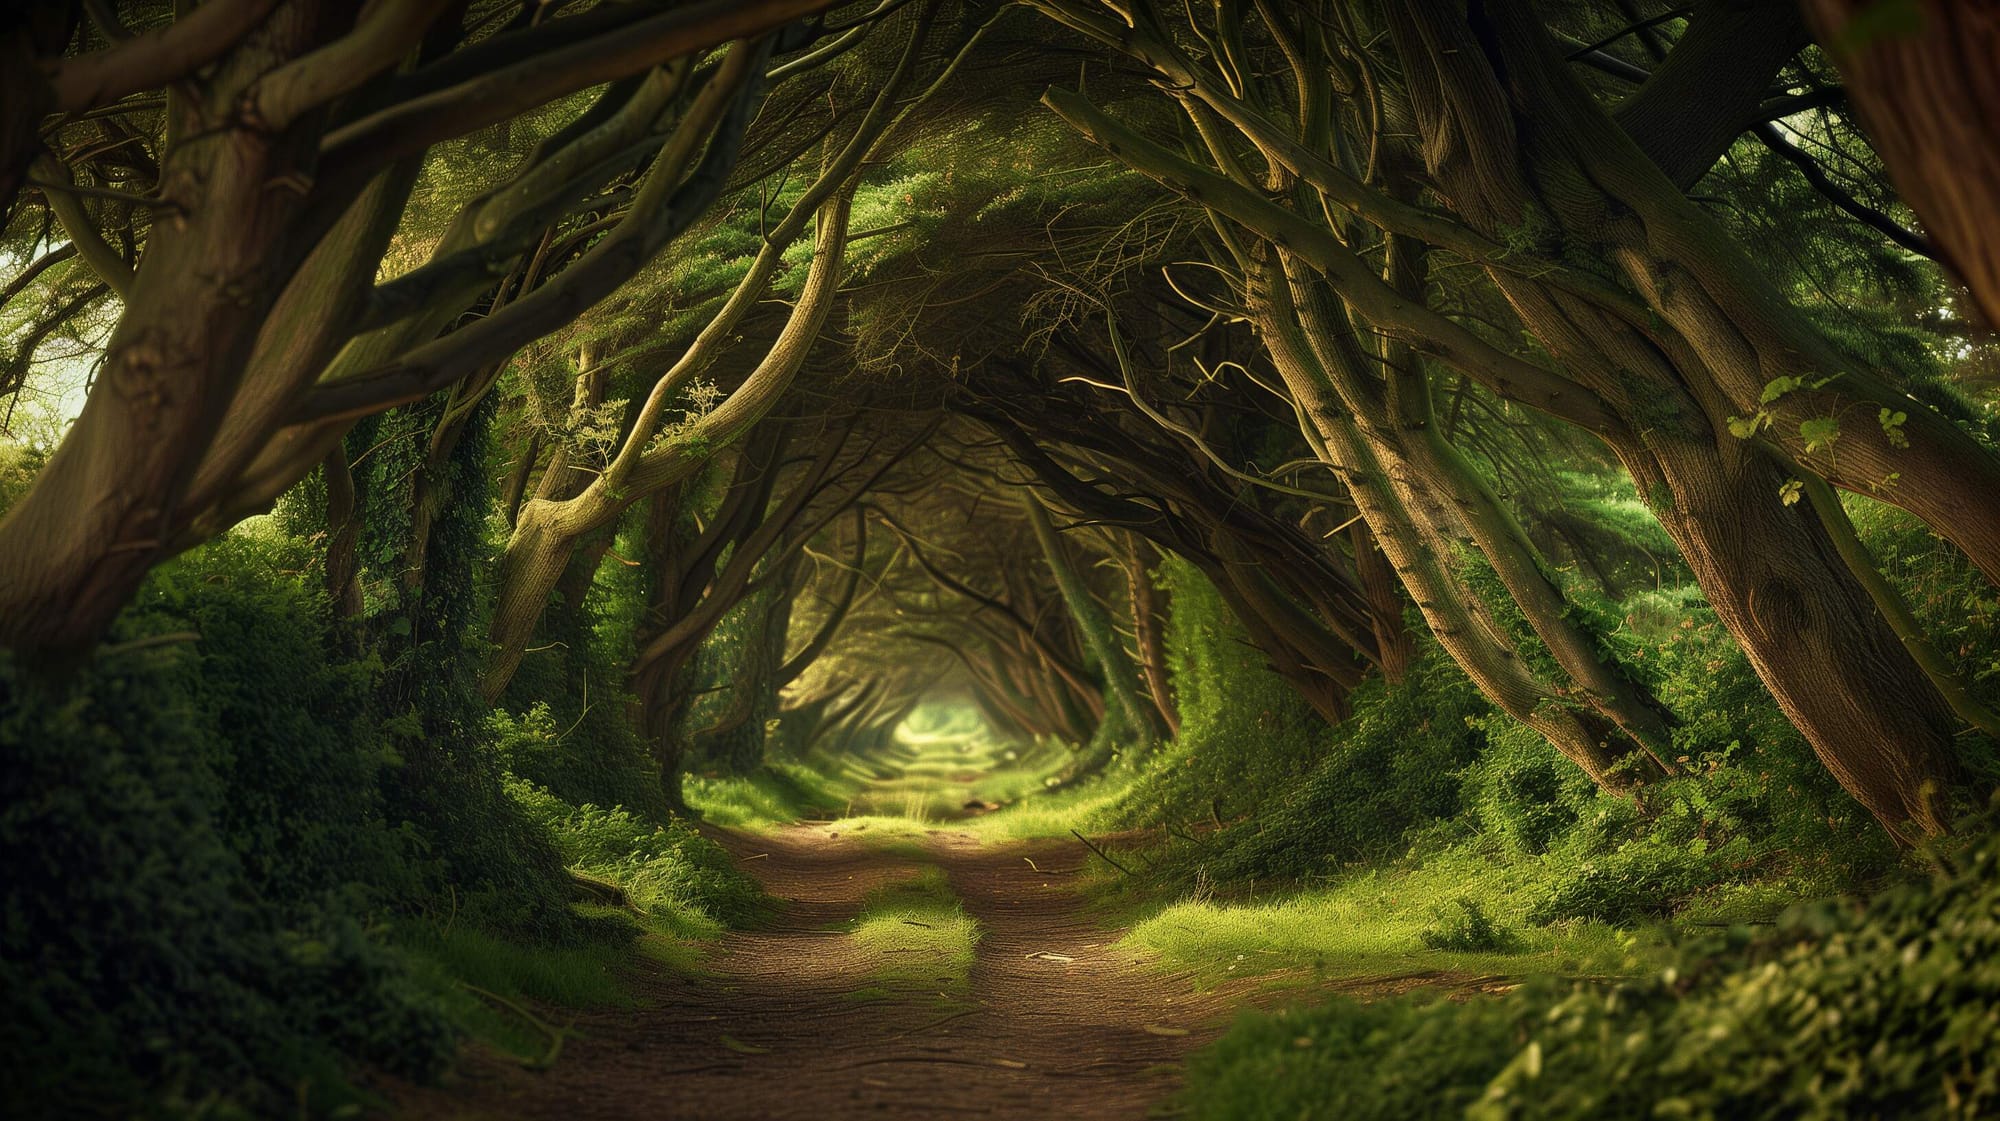 A typical setting in the UK, where Roman roads shaped the forests into natural tunnels